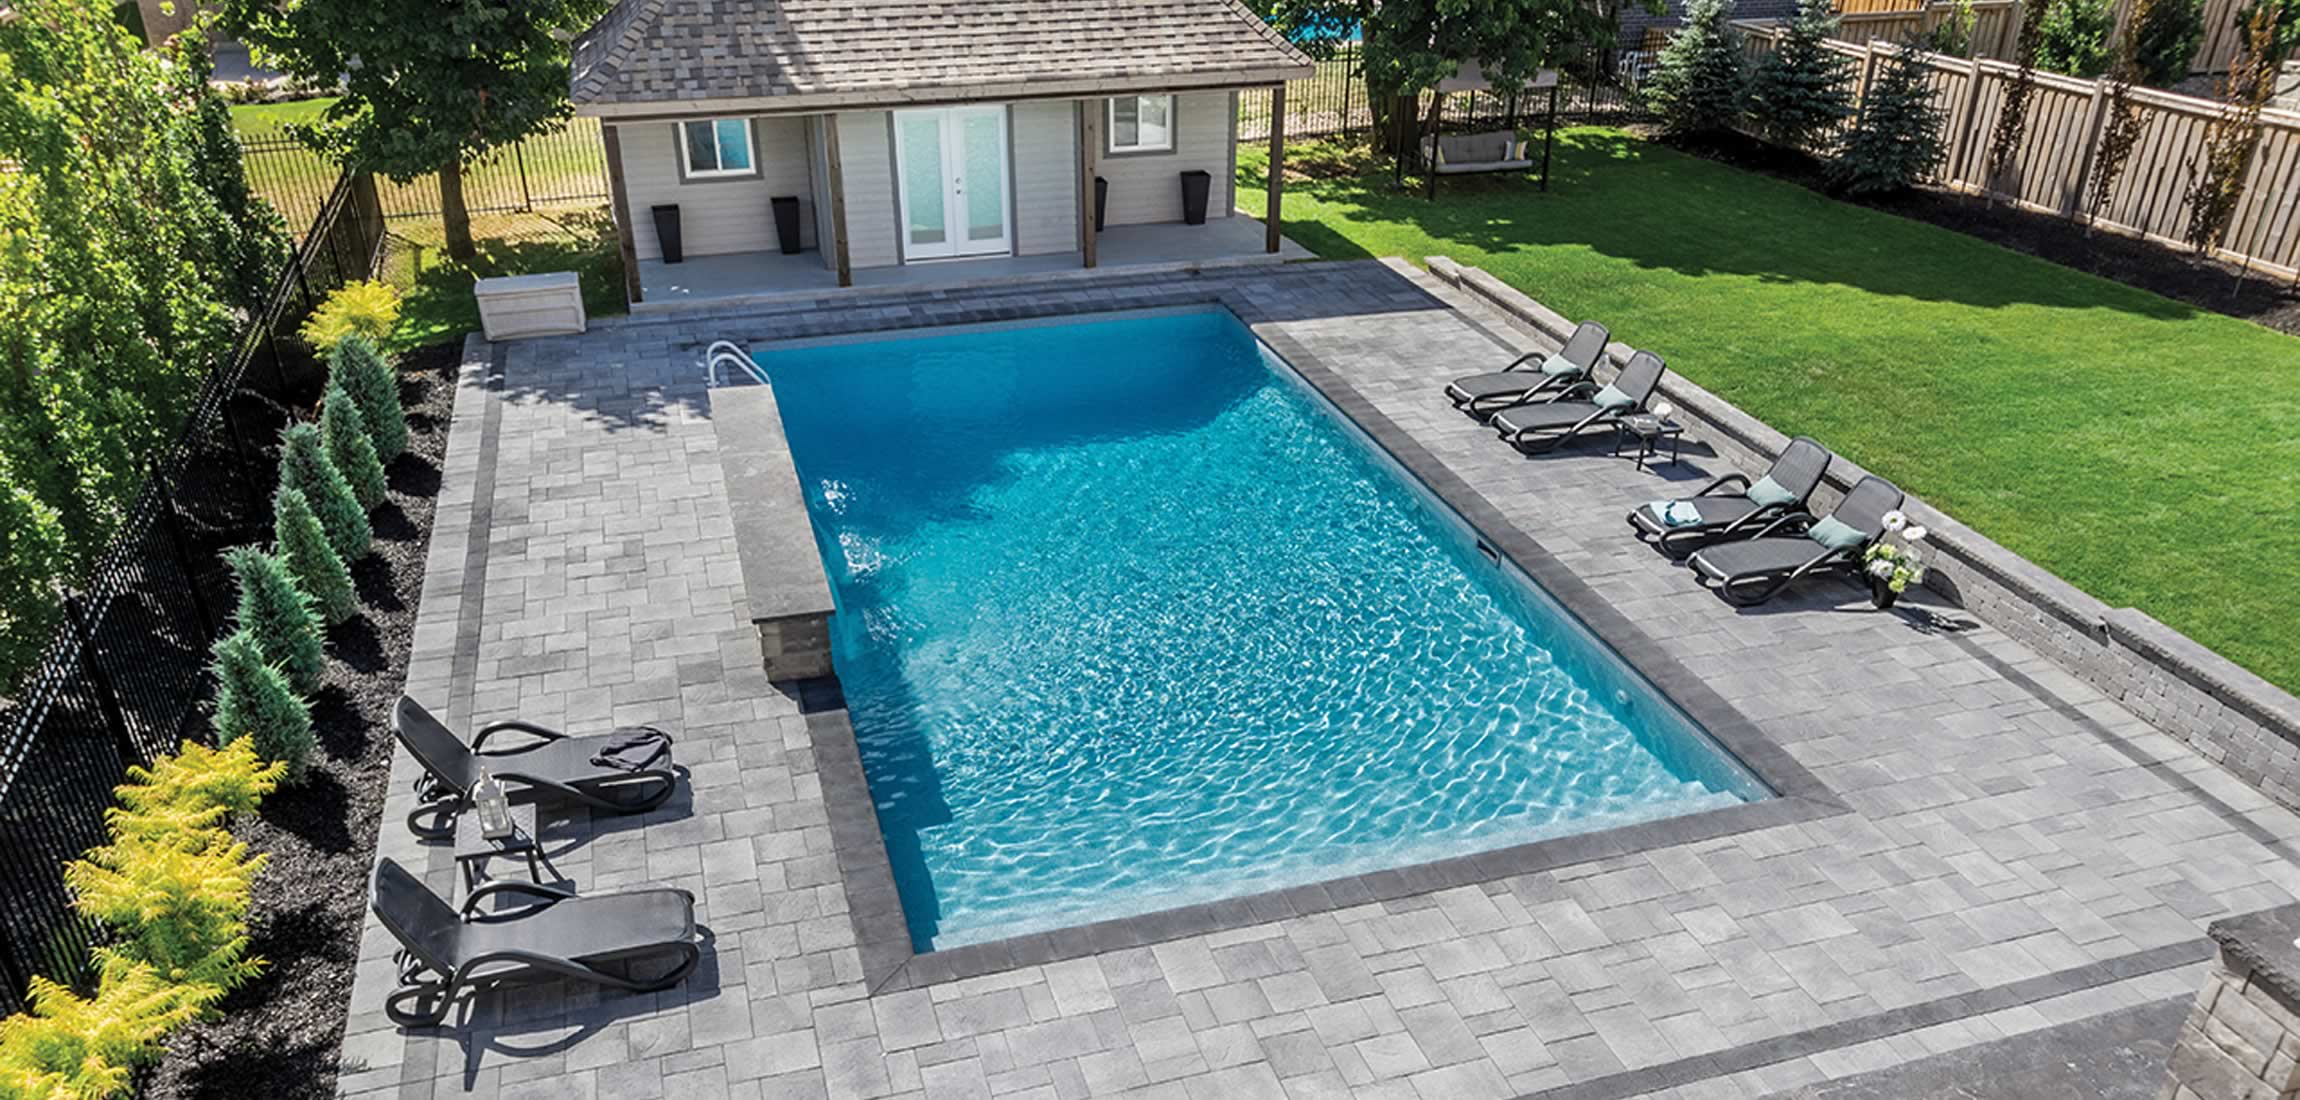 Image of a pool and surrounding stone patio